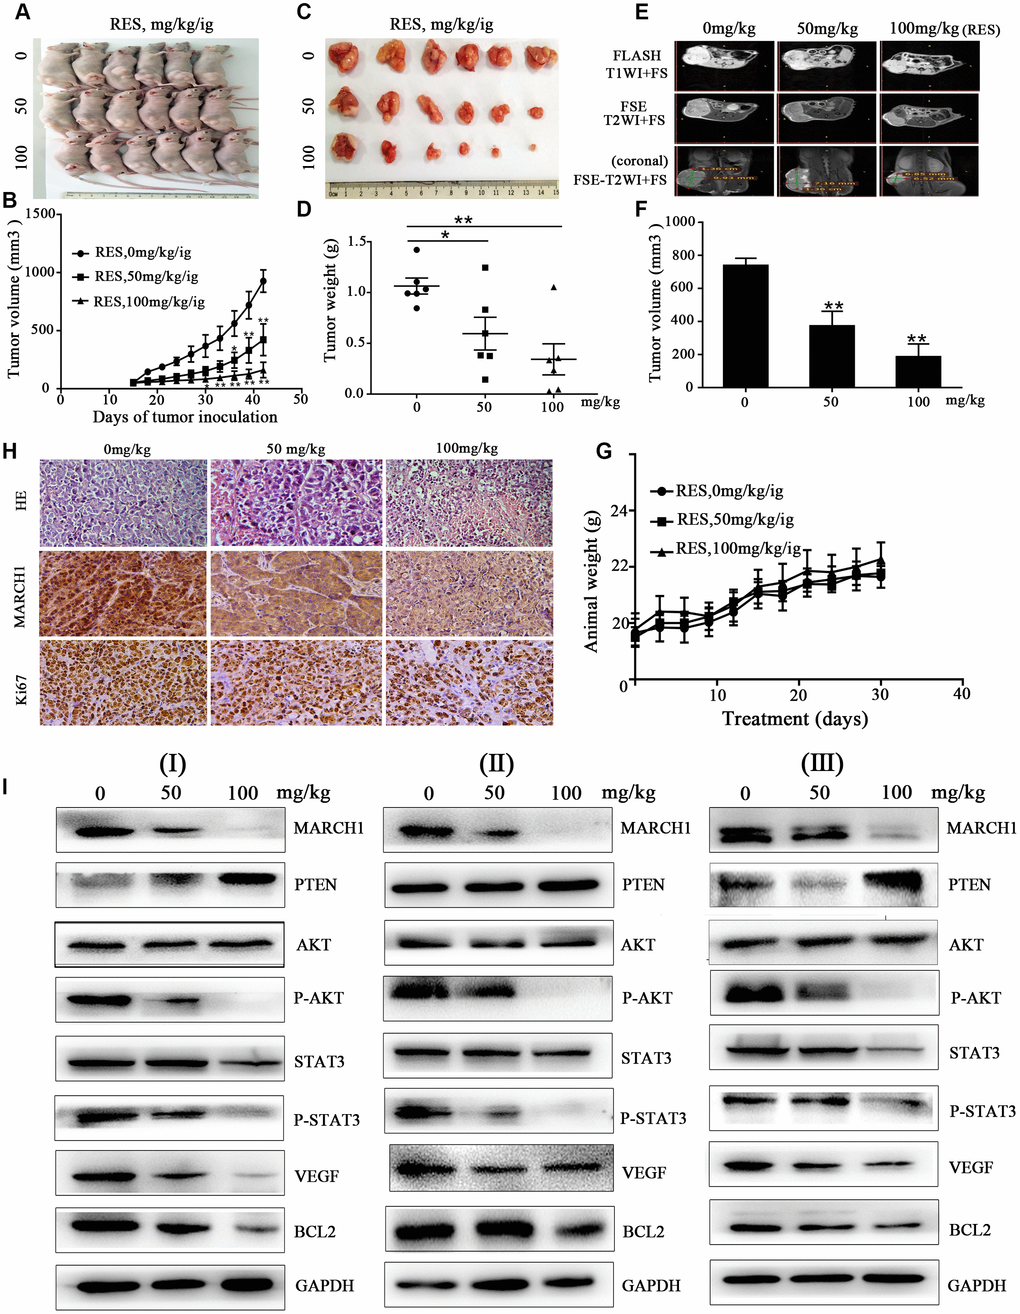 Resveratrol inhibits tumor growth in HepG2 mouse models. (A–C) HepG2 cells were inoculated into the back of BALB/c nude mice, near the right hind leg. The mice were treated with resveratrol (0, 50, and 100 mg/kg/ig). Representative images of the tumor are shown, and the tumor volume growth curves of resveratrol are plotted. (D) Tumor weight after resveratrol treatment. (E) Representative images of mice MRI. (F) Average volume of tumor measured on coronal T2-weighted MRI after resveratrol treatment. (G) The changes in animal weight are shown during resveratrol treatment. (H) Tumor tissue slides were stained with H&E and IHC performed. (I) Levels of MARCH1, PTEN, p-AKT, p-STAT3, VEGF, and Bcl2 in tumors treated with resveratrol were analyzed by western blotting. GAPDH was also detected as a loading control. All values represent the mean ± SD. **P 